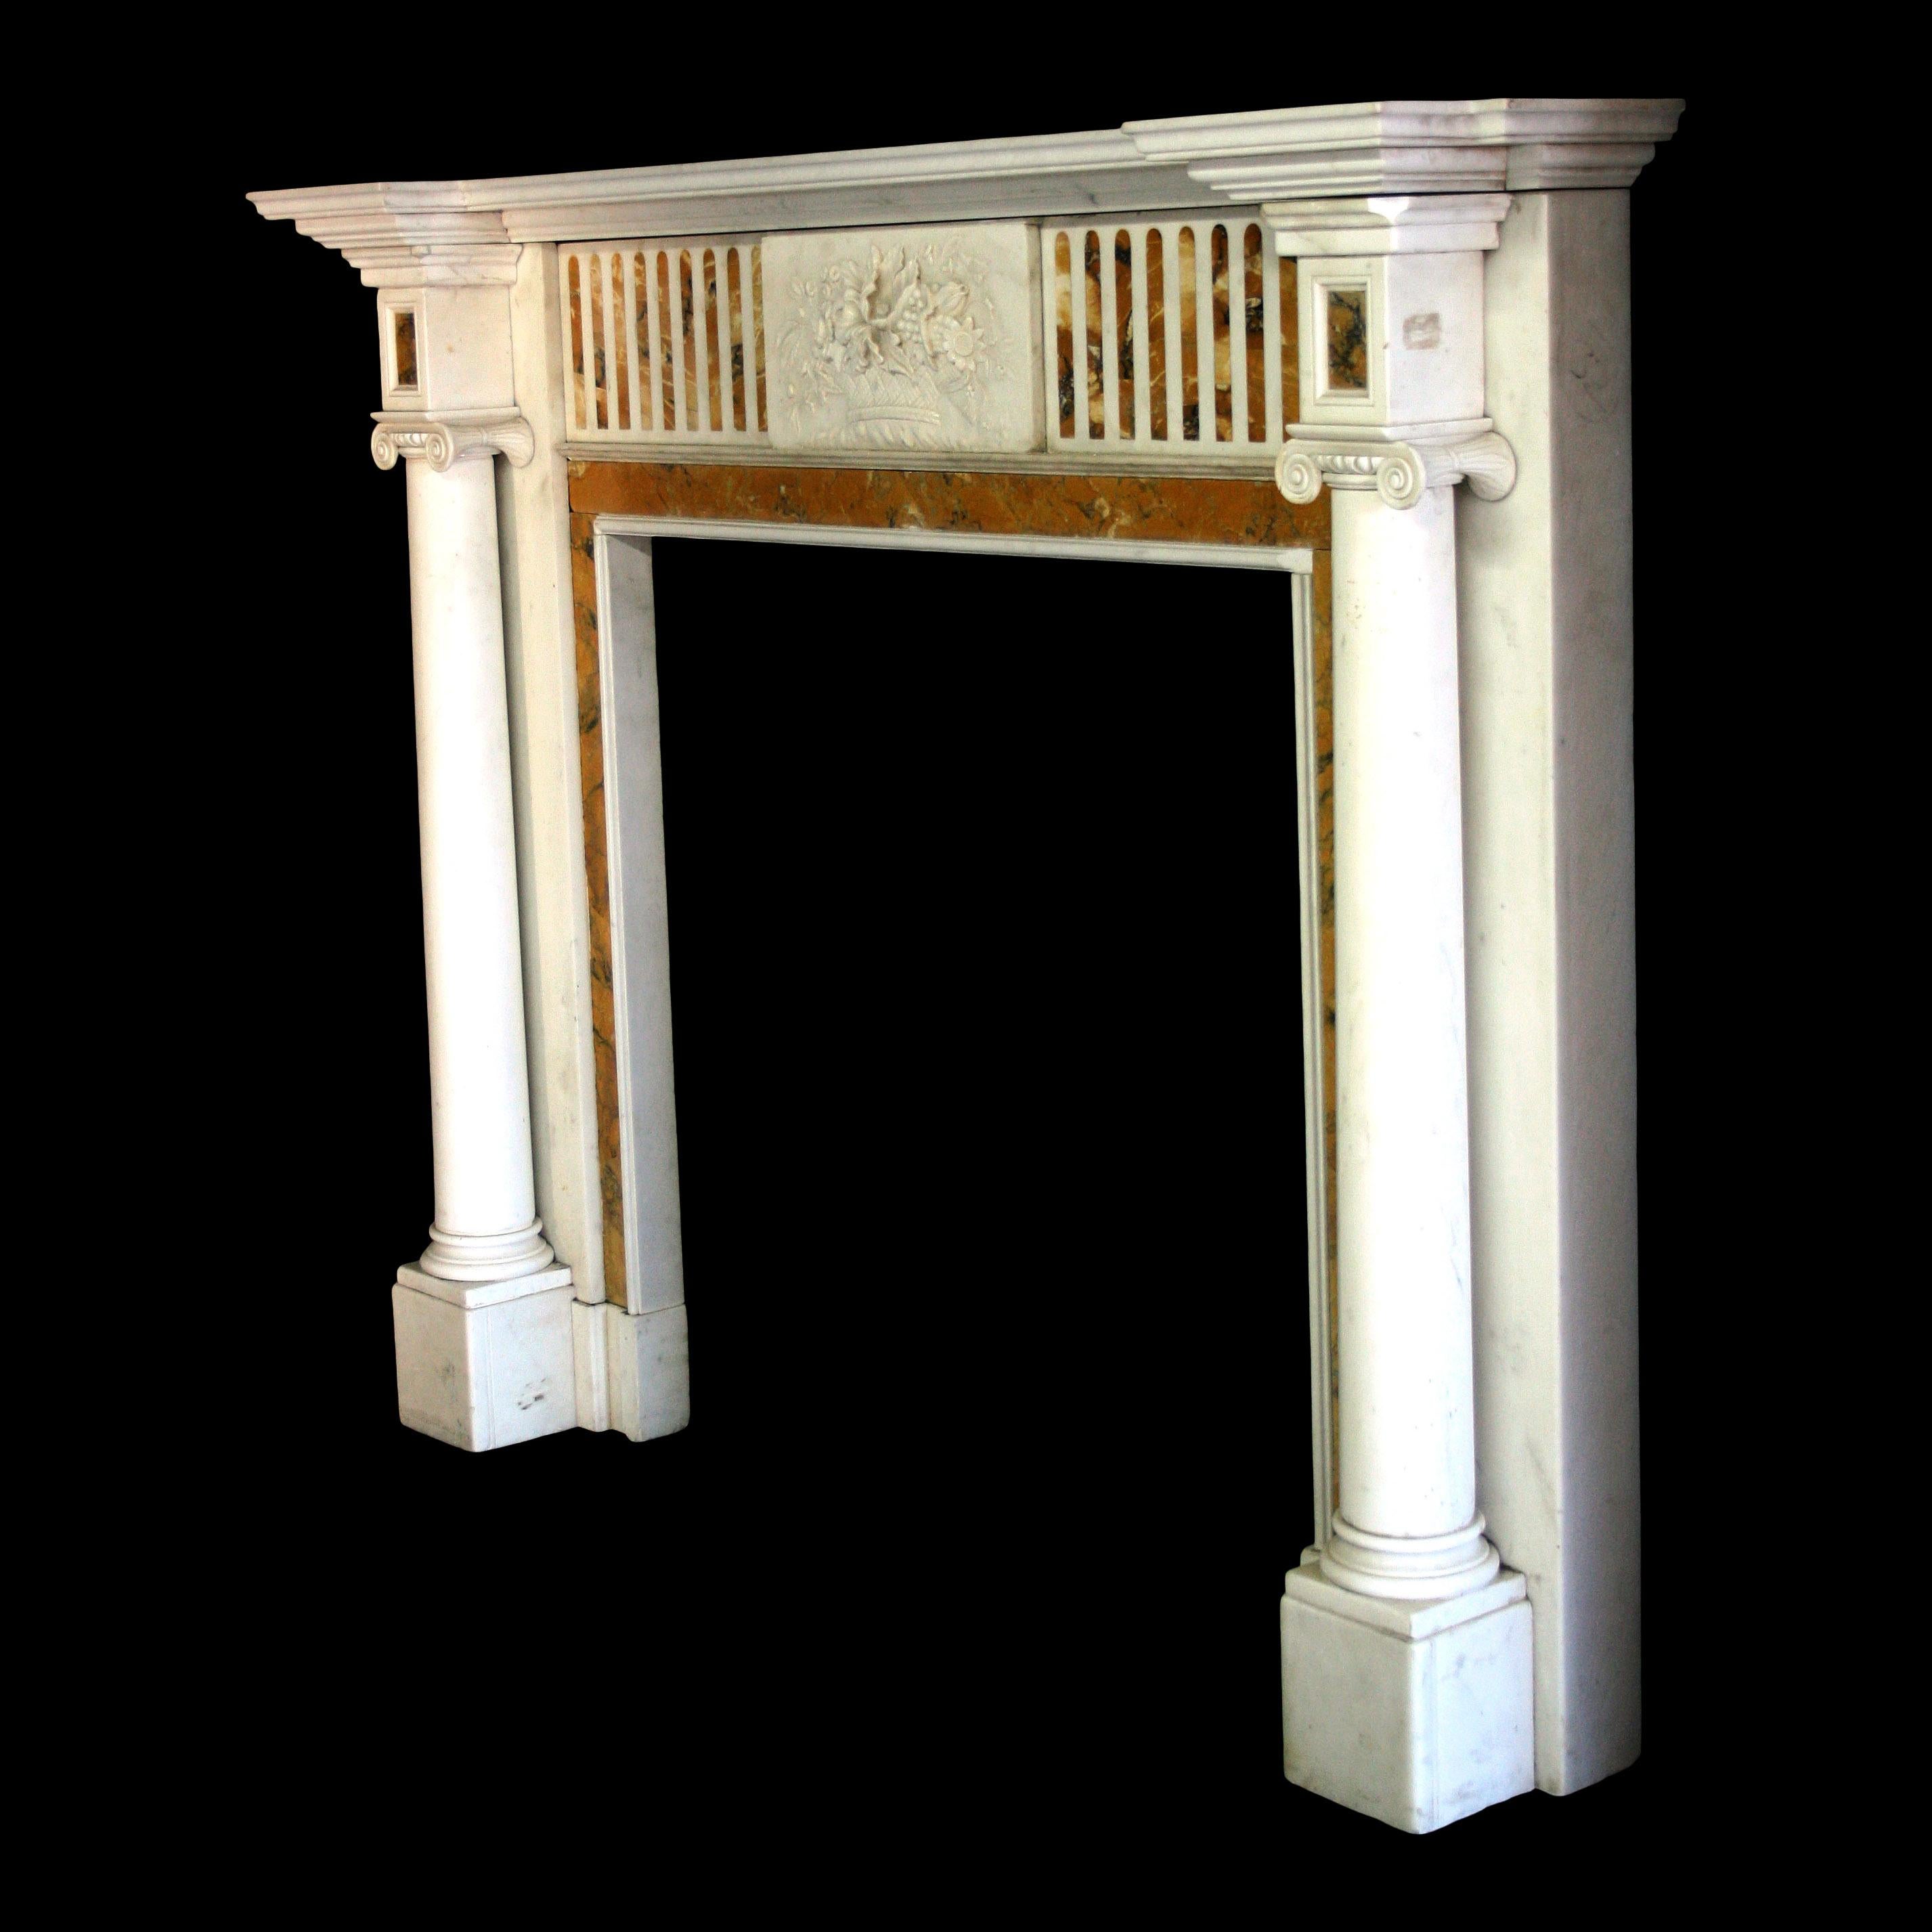 A 19th century Classical Chimneypiece in the George lll manner, in Statuary and Siena marble. The jambs have freestanding plain columns on block feet with Ionic capitals, with a Siena in- ground, and Statuary back panel and returns.
The centre